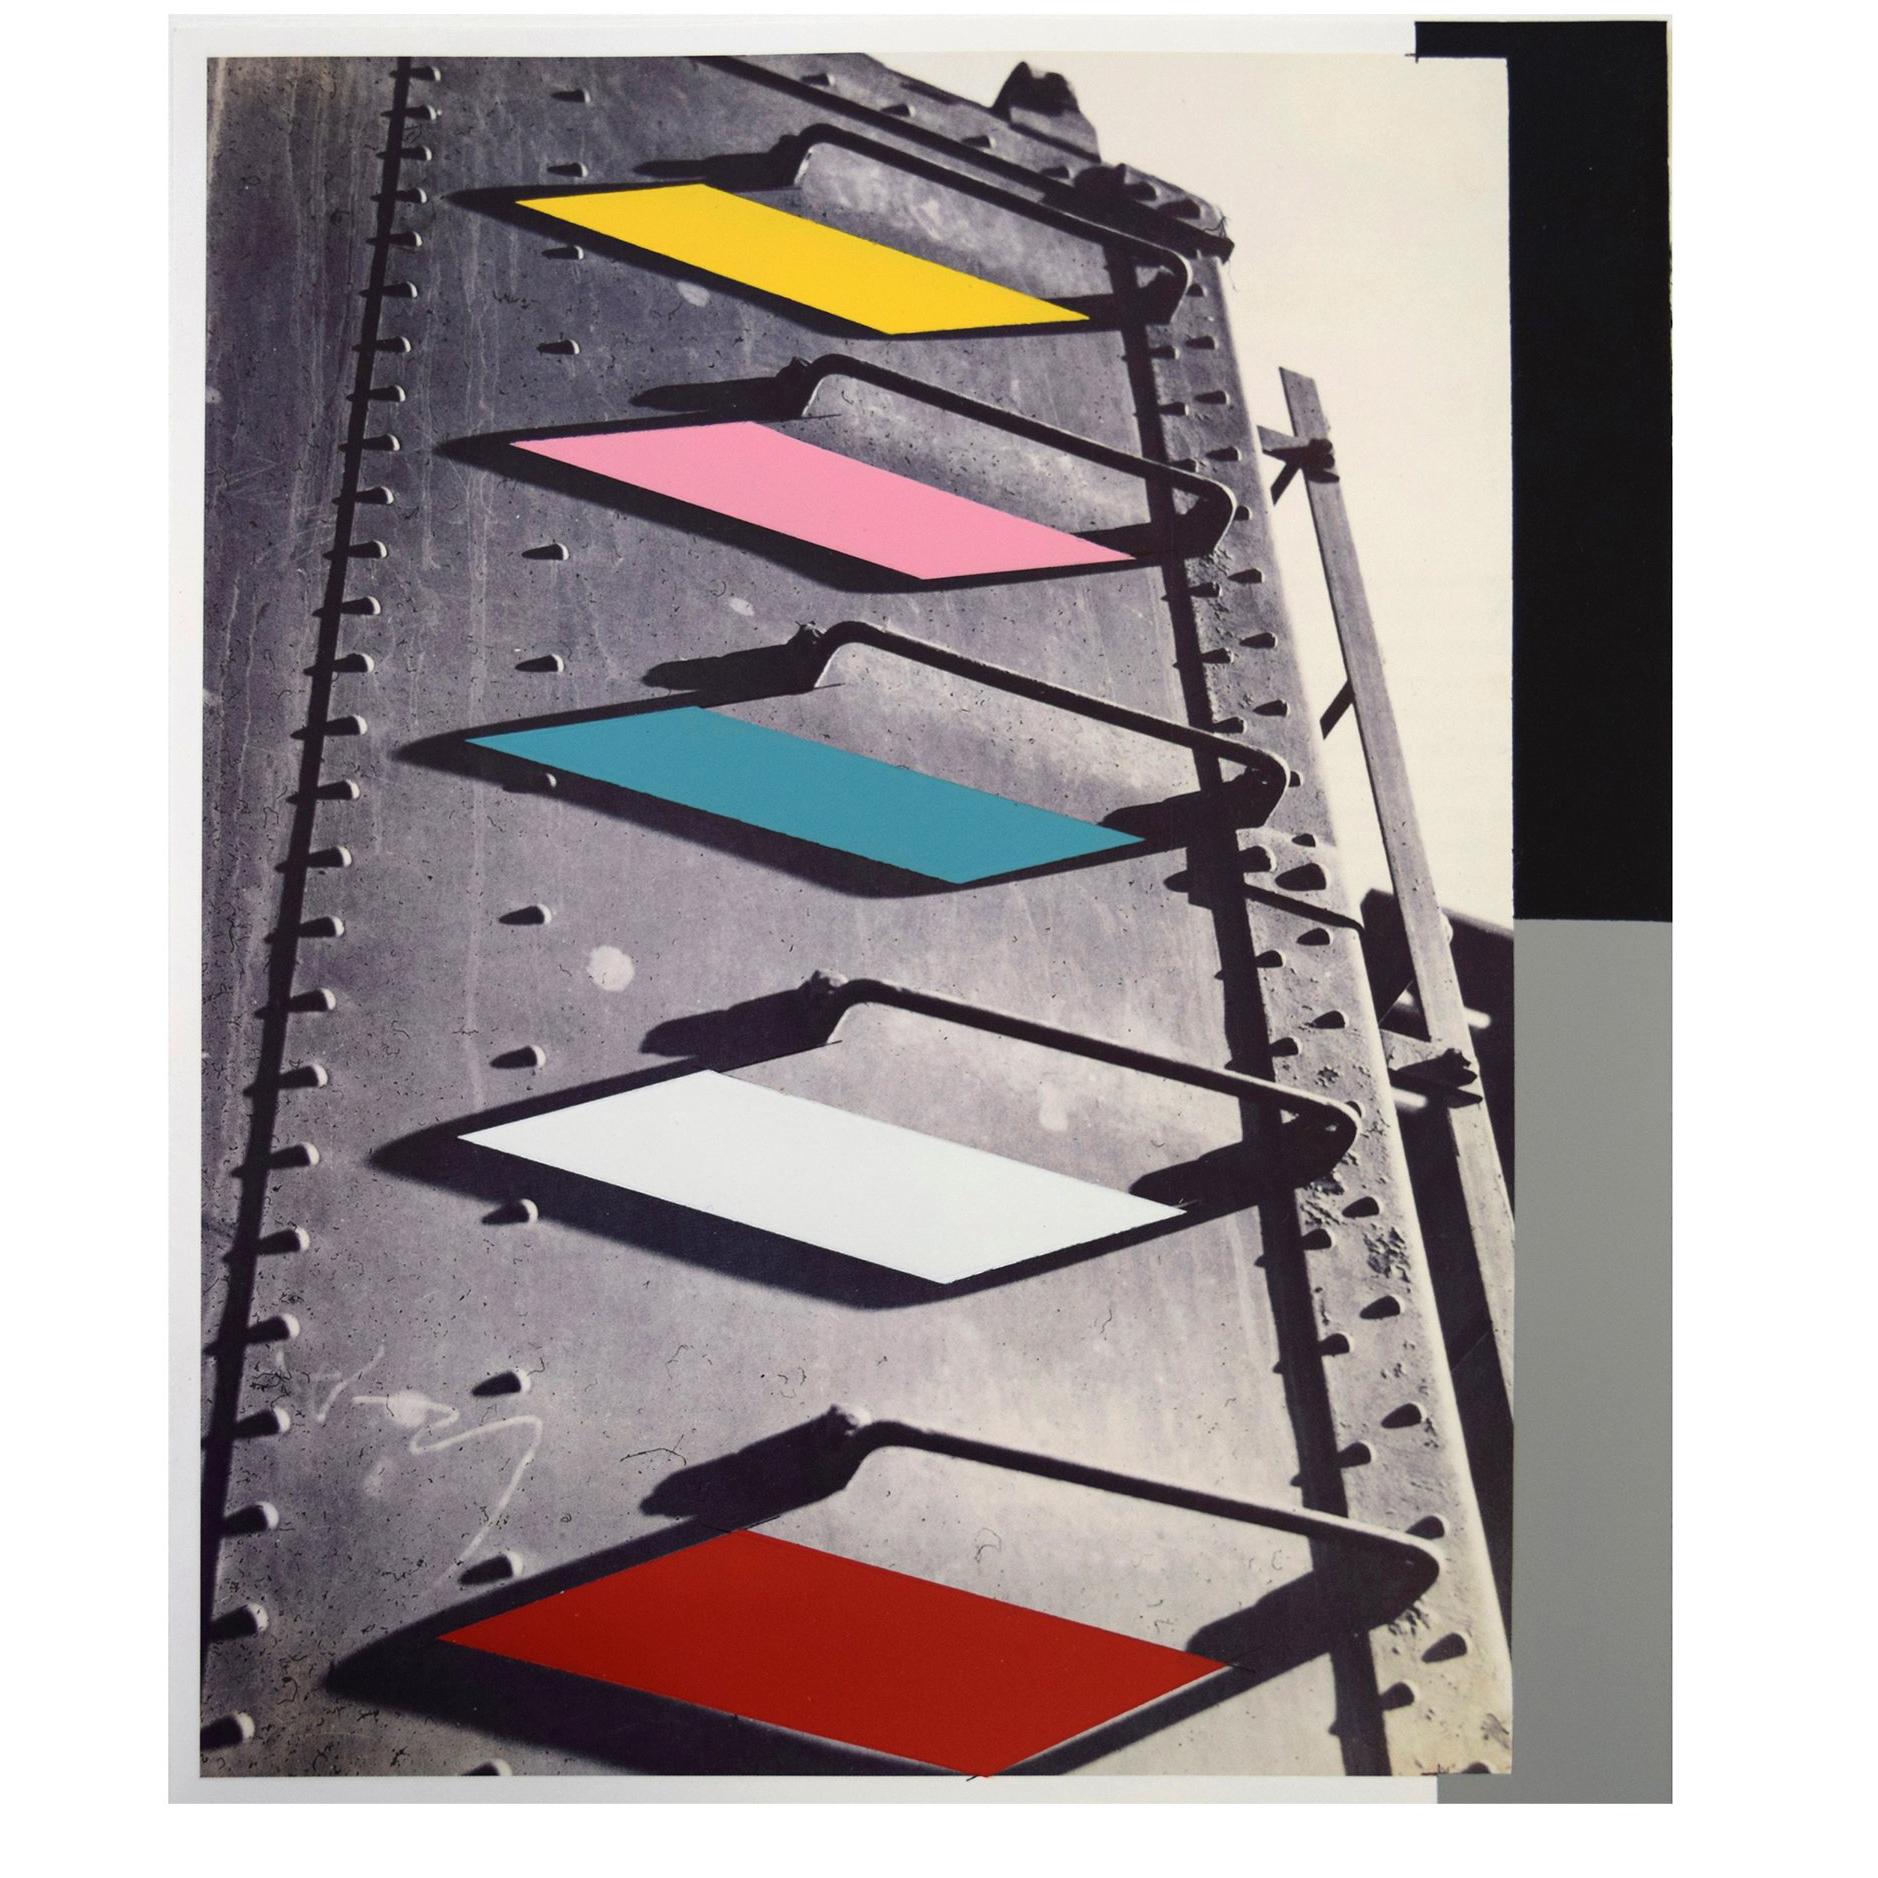 In this series of works Marco Rountree has taken classic photographic images by Agustin Jimenez and has re-interpreted them by using acrylic spray paint, blocking or adding color elements to the image. These works form part of Rountree's extensive